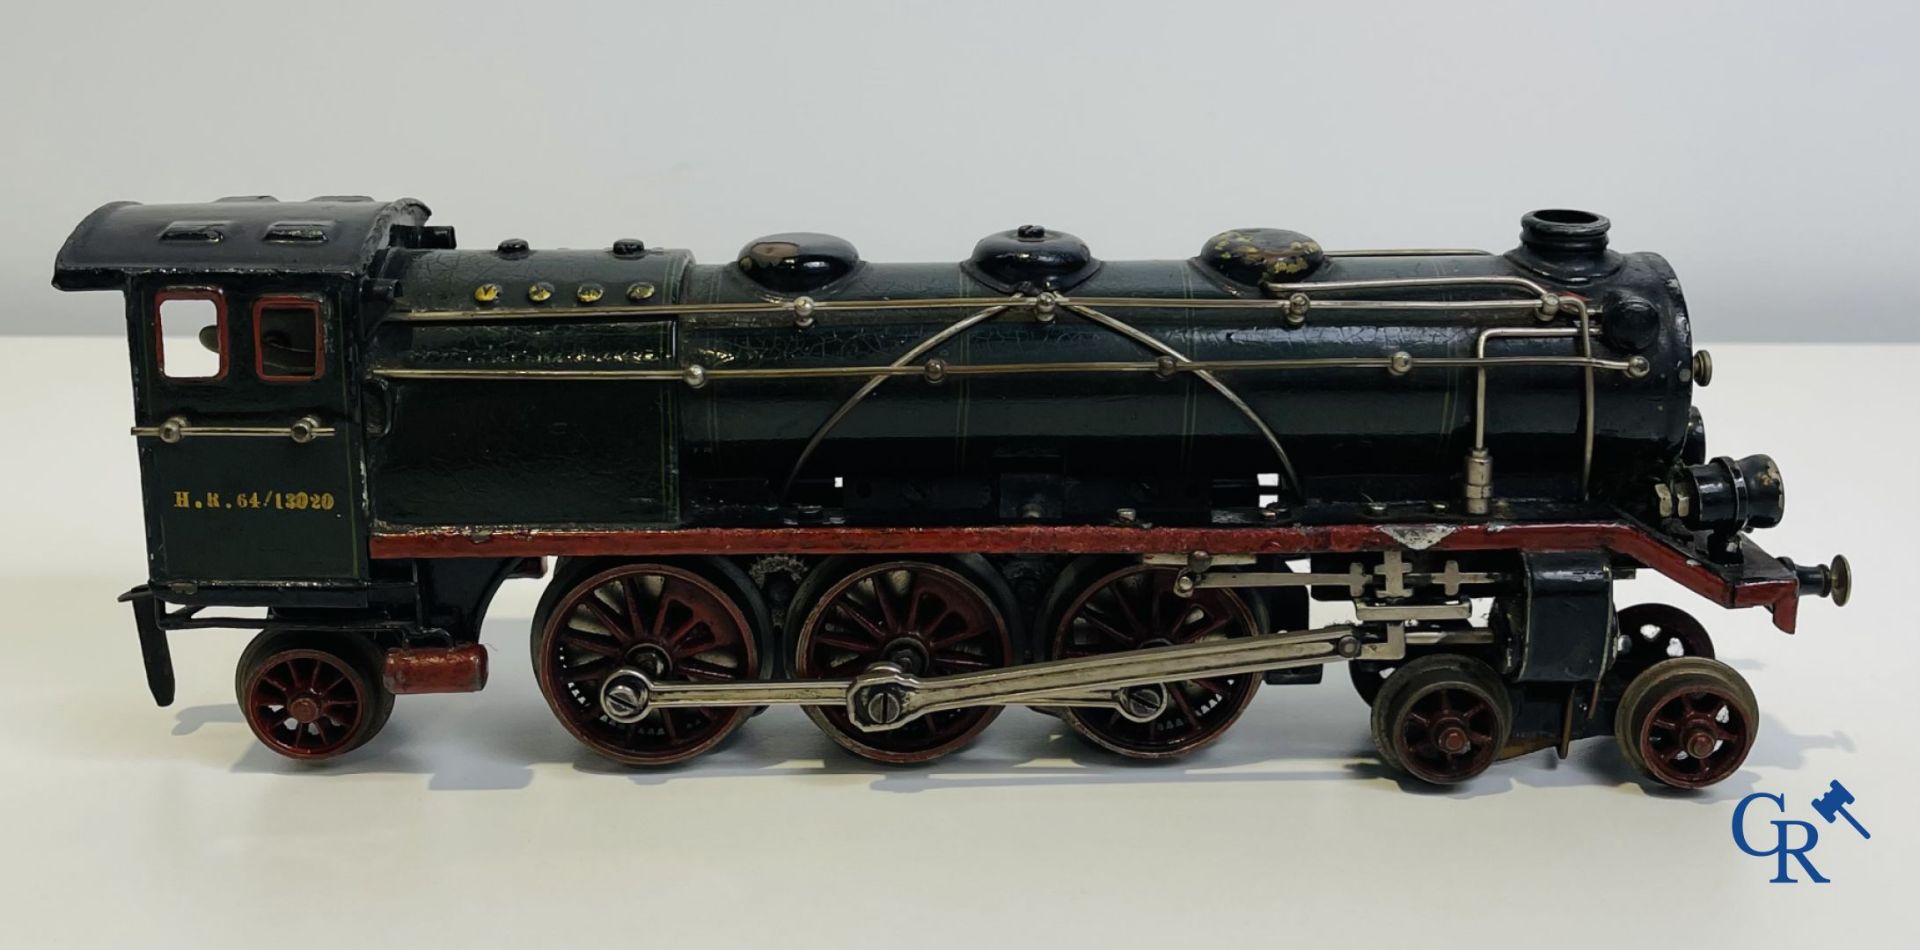 Old toys: Märklin, Locomotive with towing tender and dining car.
About 1930. - Image 5 of 32